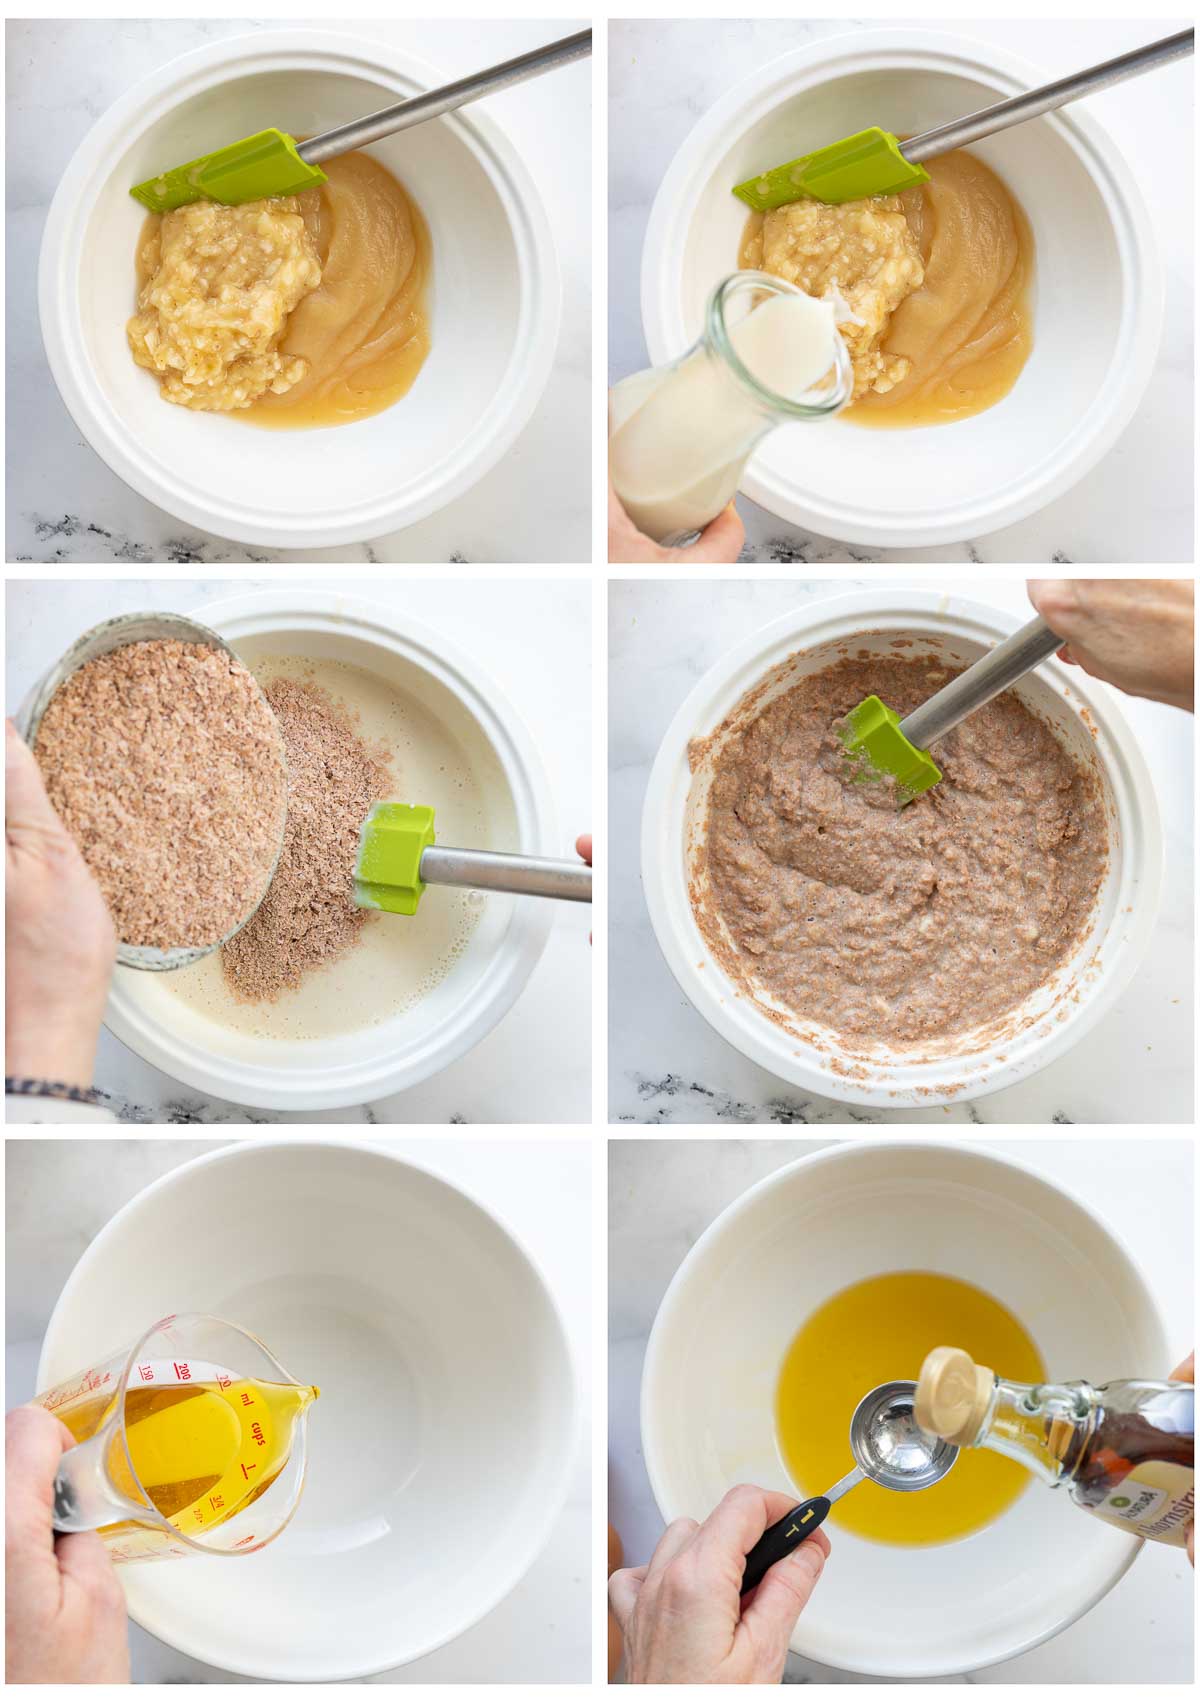 Preperations Steps for Bran Muffins with Apple, Banana & Carrot